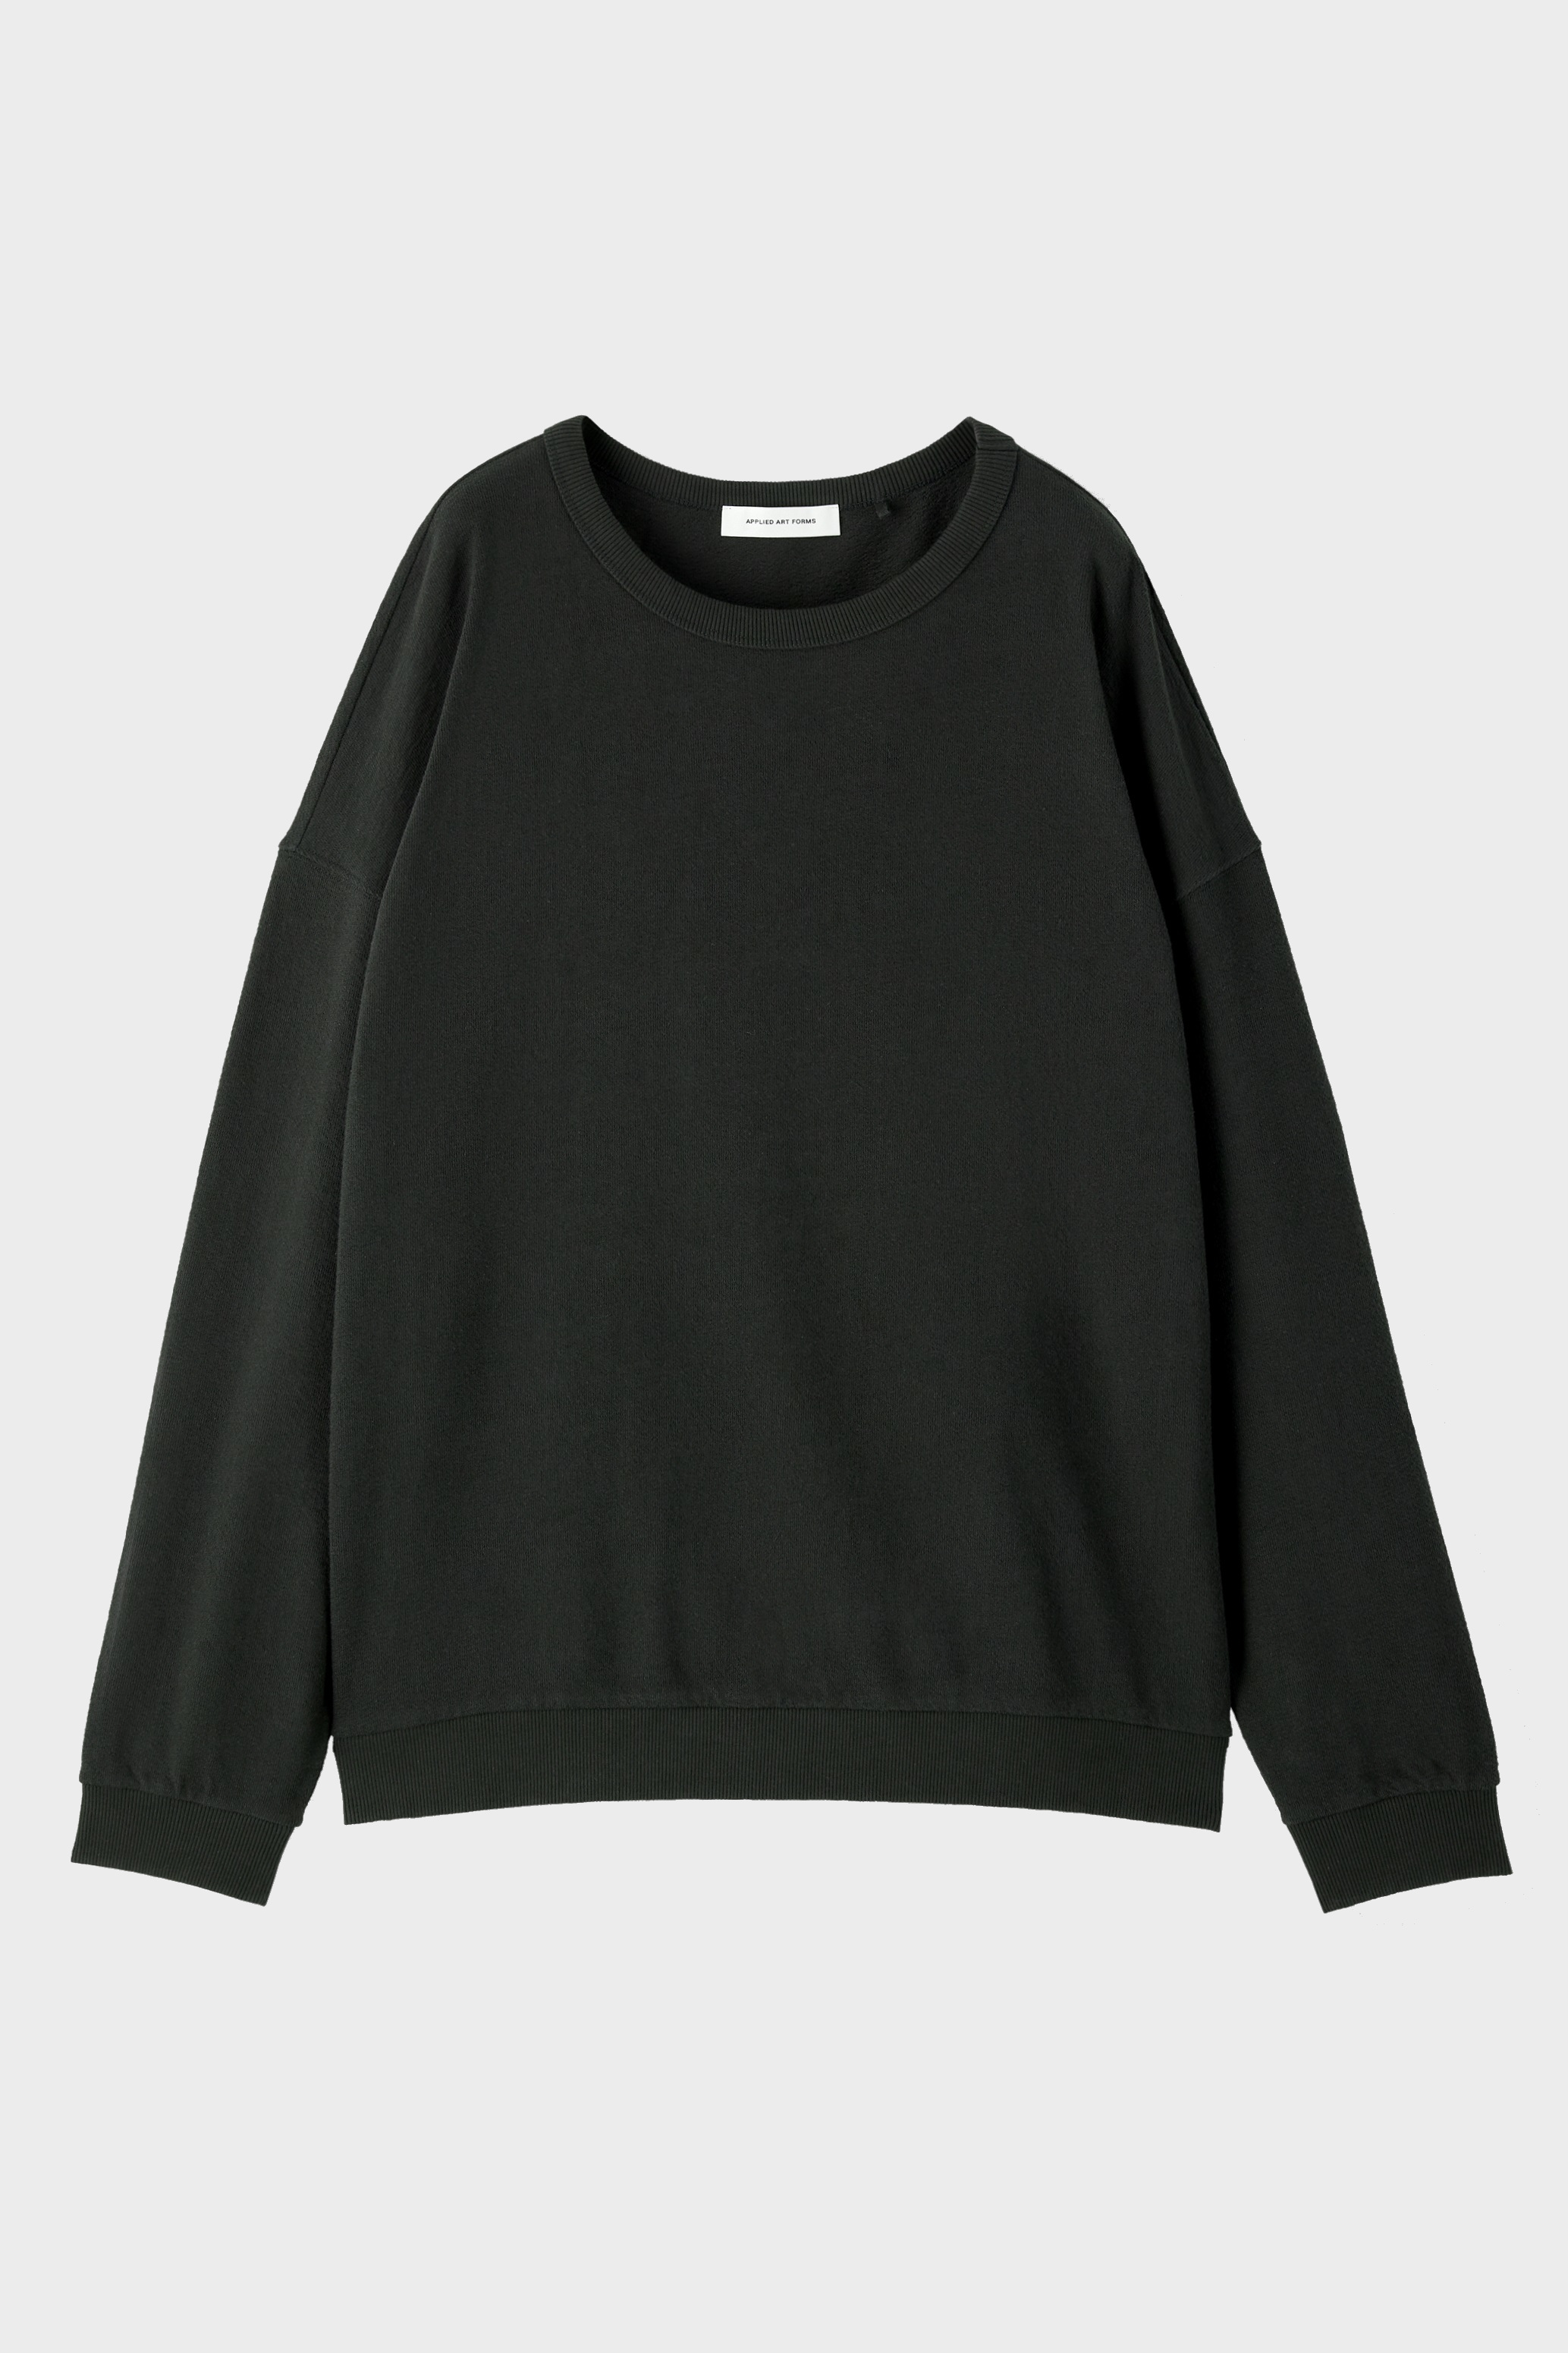 APPLIED ART FORMS Structure Sweater in Charcoal